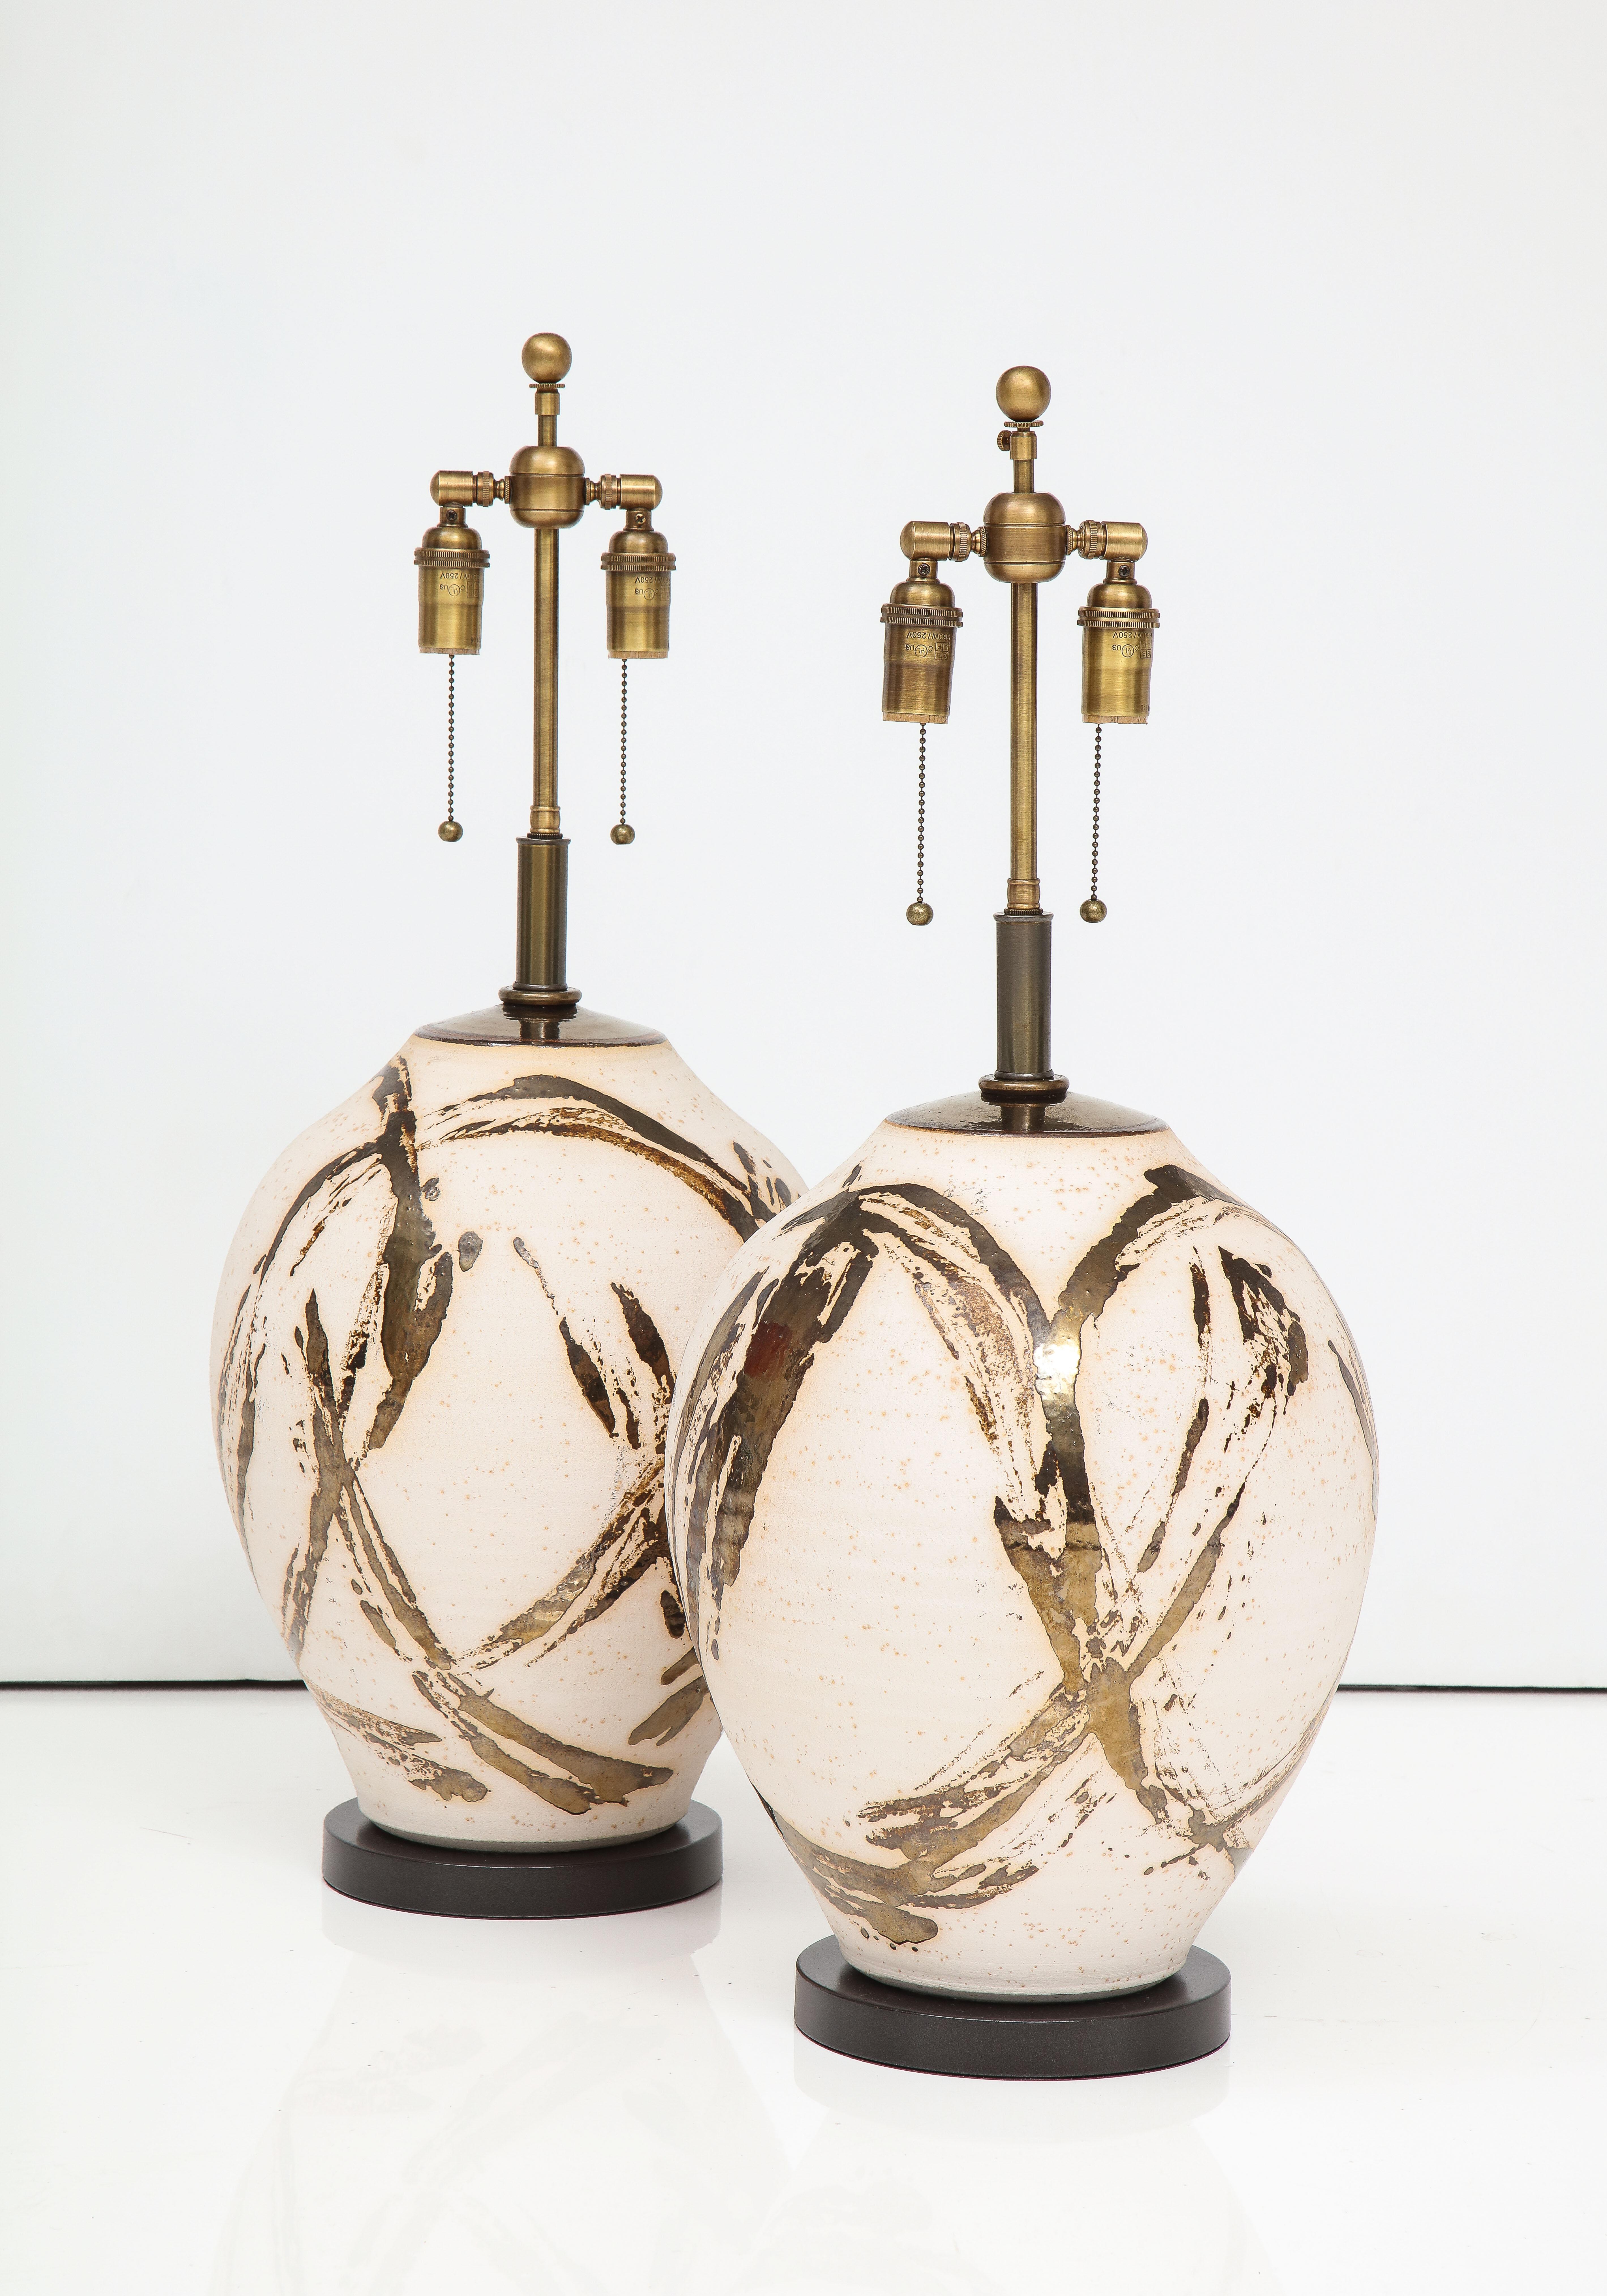 Large pair of Raku Ware lamps designed for a Steve Chase interior.
The lamps have a wonderful Batik style Metallic glazed finish, and they have
been Newly rewired with adjustable antique bronze double clusters and rayon cords.
Measures: The height